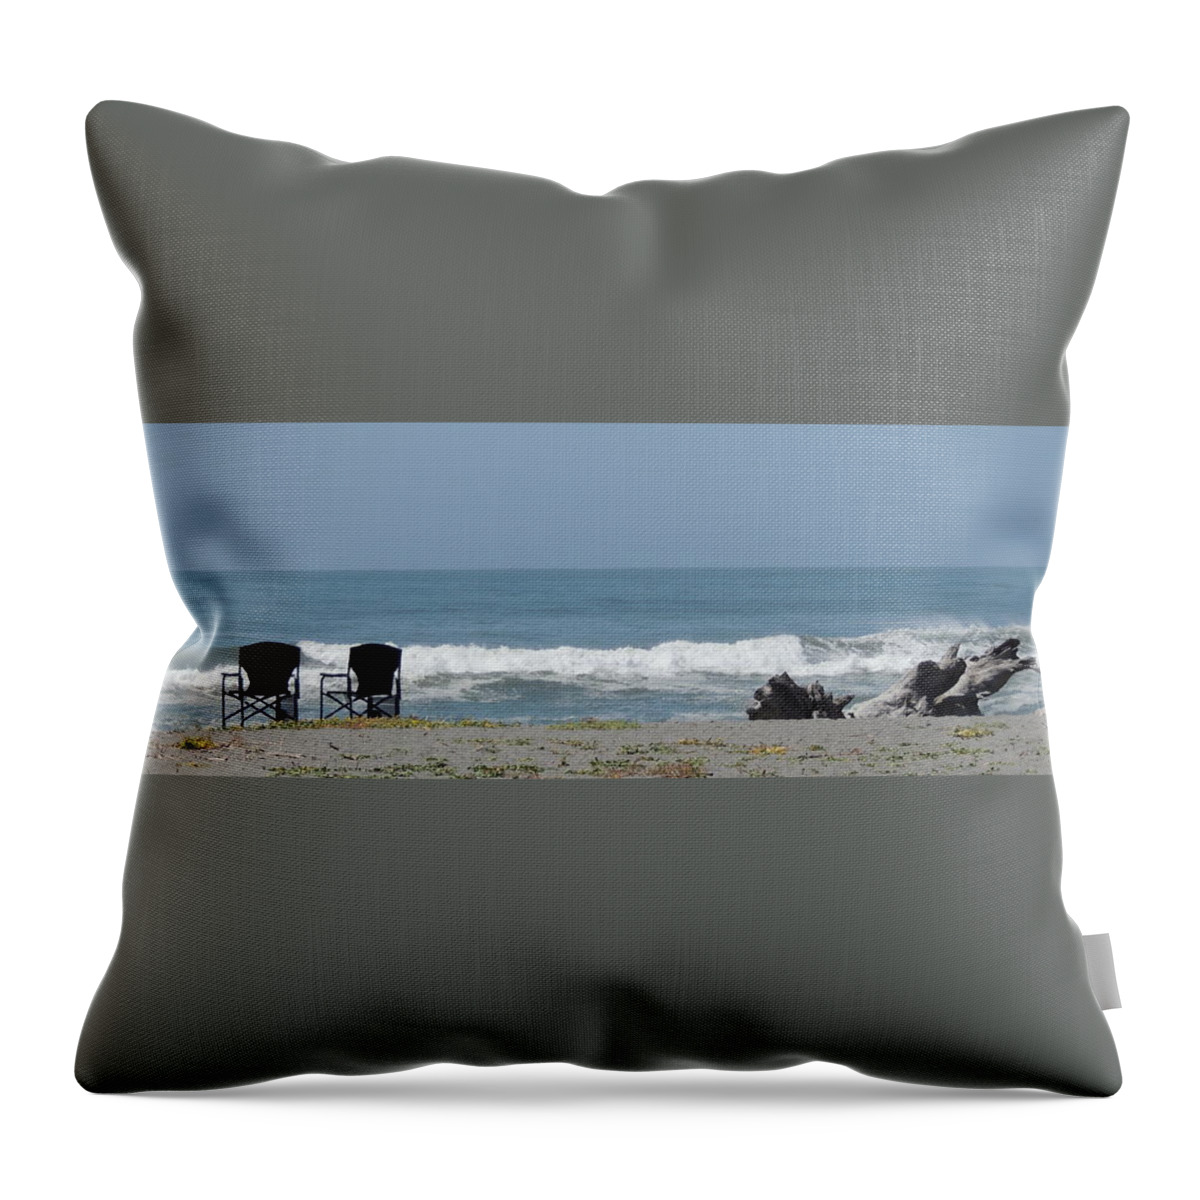 Driftwood Throw Pillow featuring the photograph Serenity by Traci Hallstrom